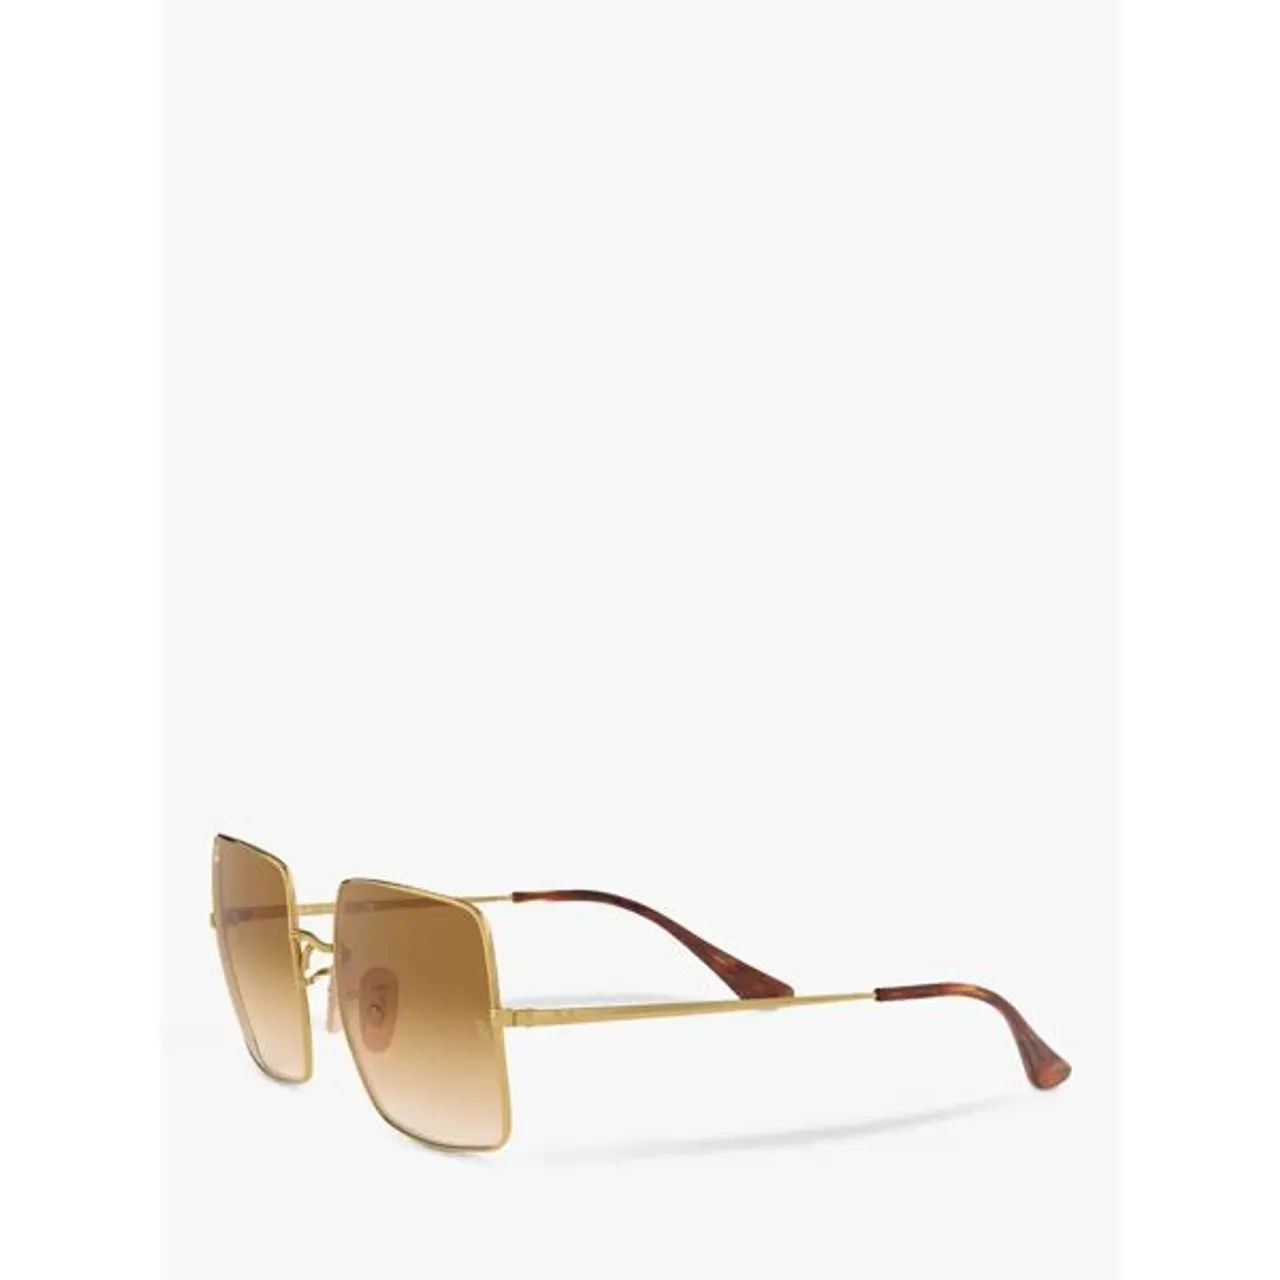 Ray-Ban RB1971 Unisex Square Sunglasses, Gold/Brown Gradient - Gold/Brown Gradient - Male